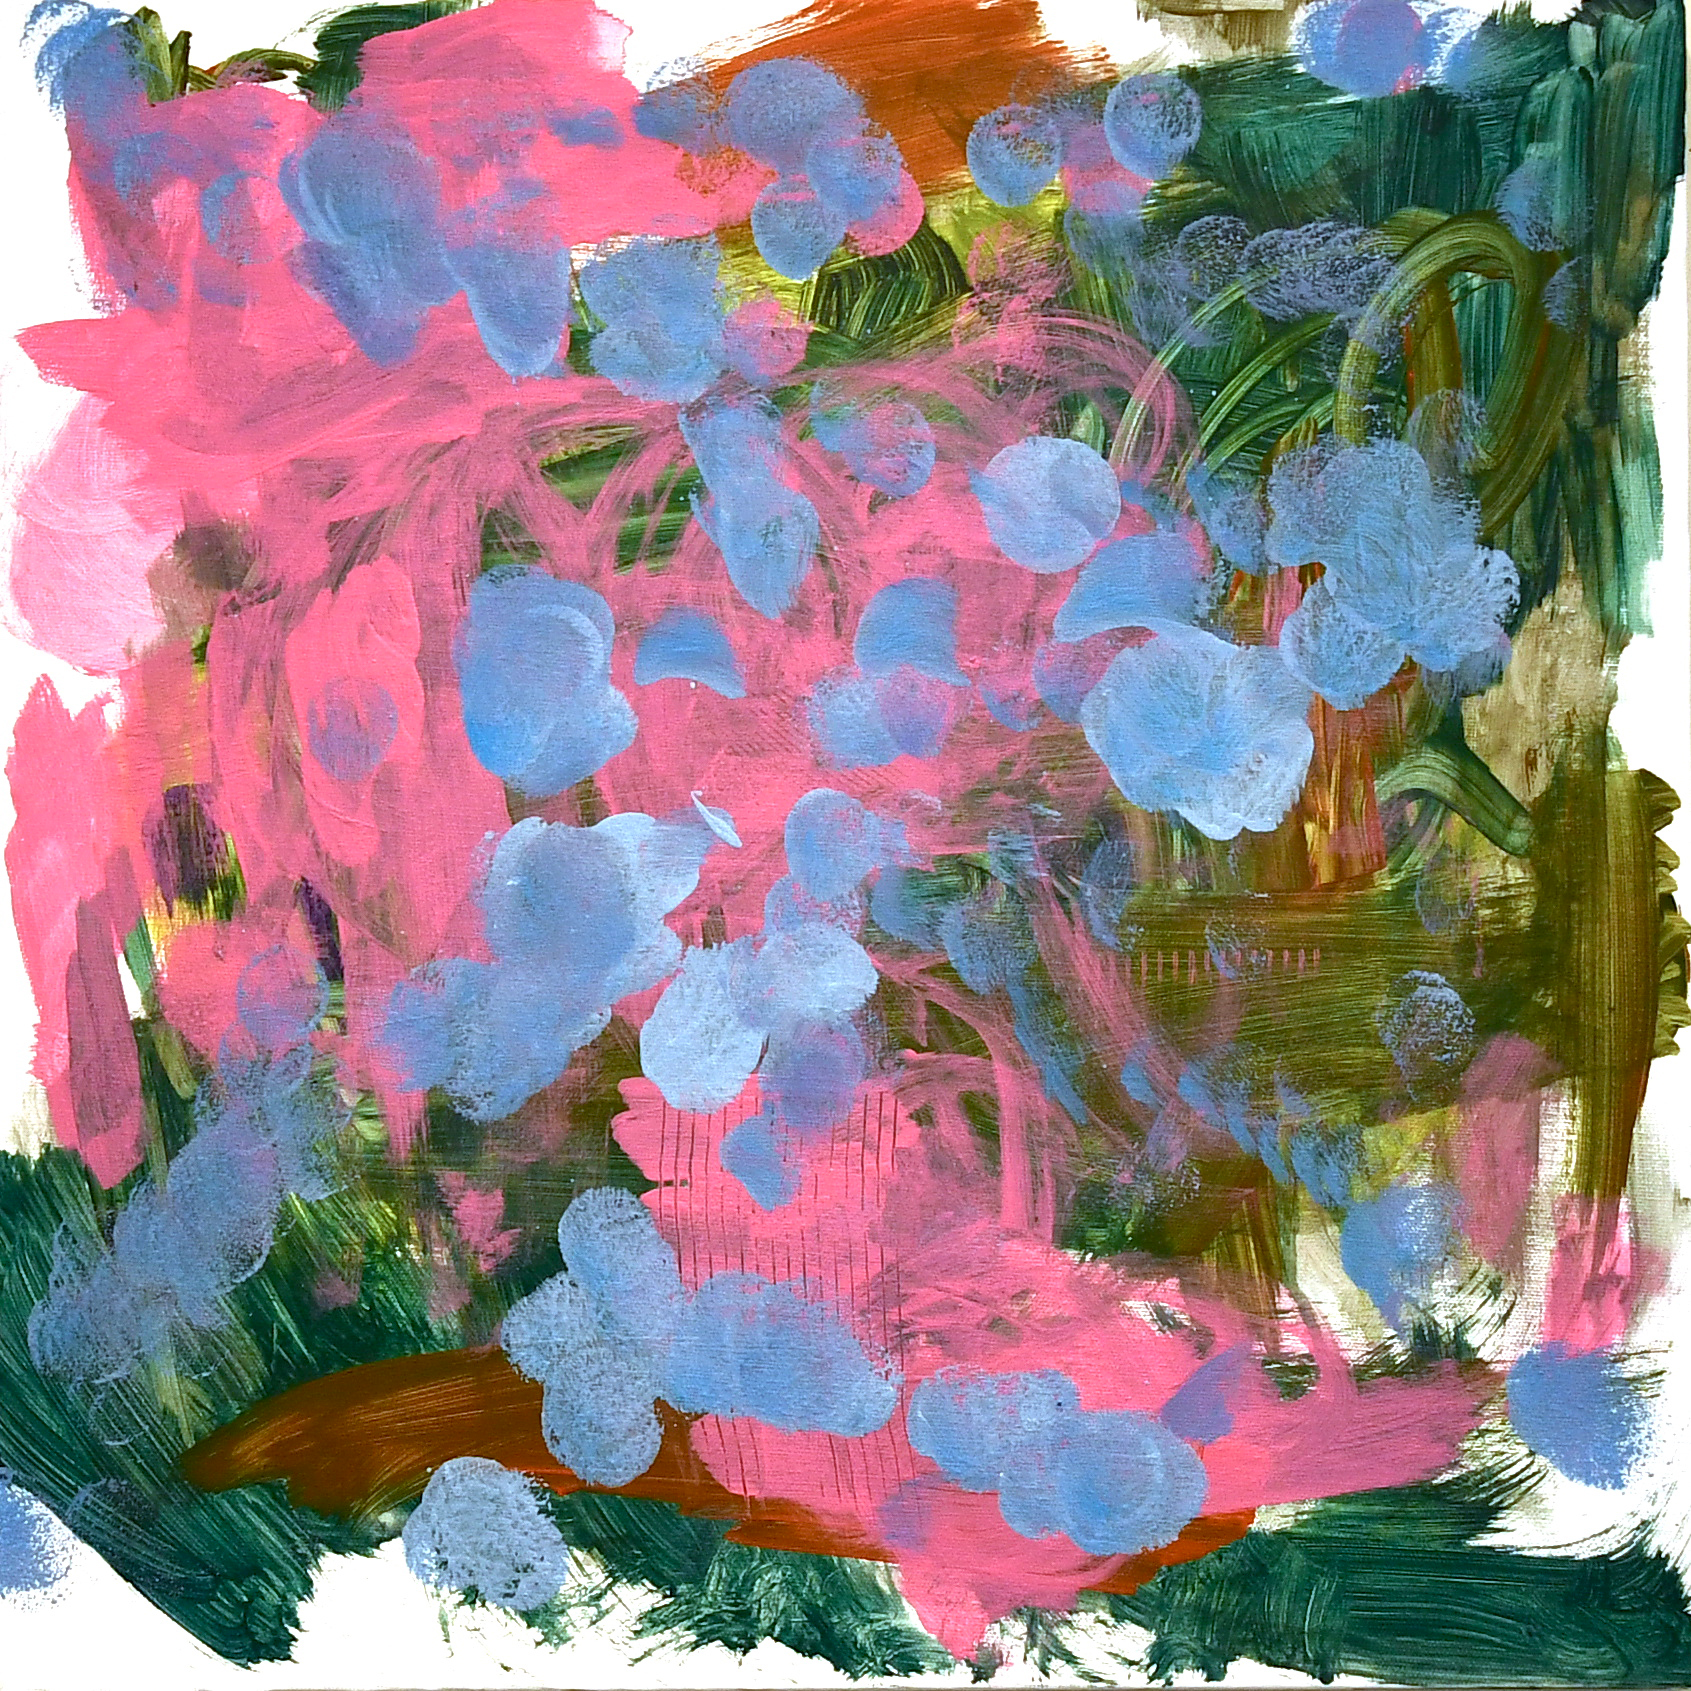 Image description: Abstract painting with bright pink, shades of green, and ocean blue dots